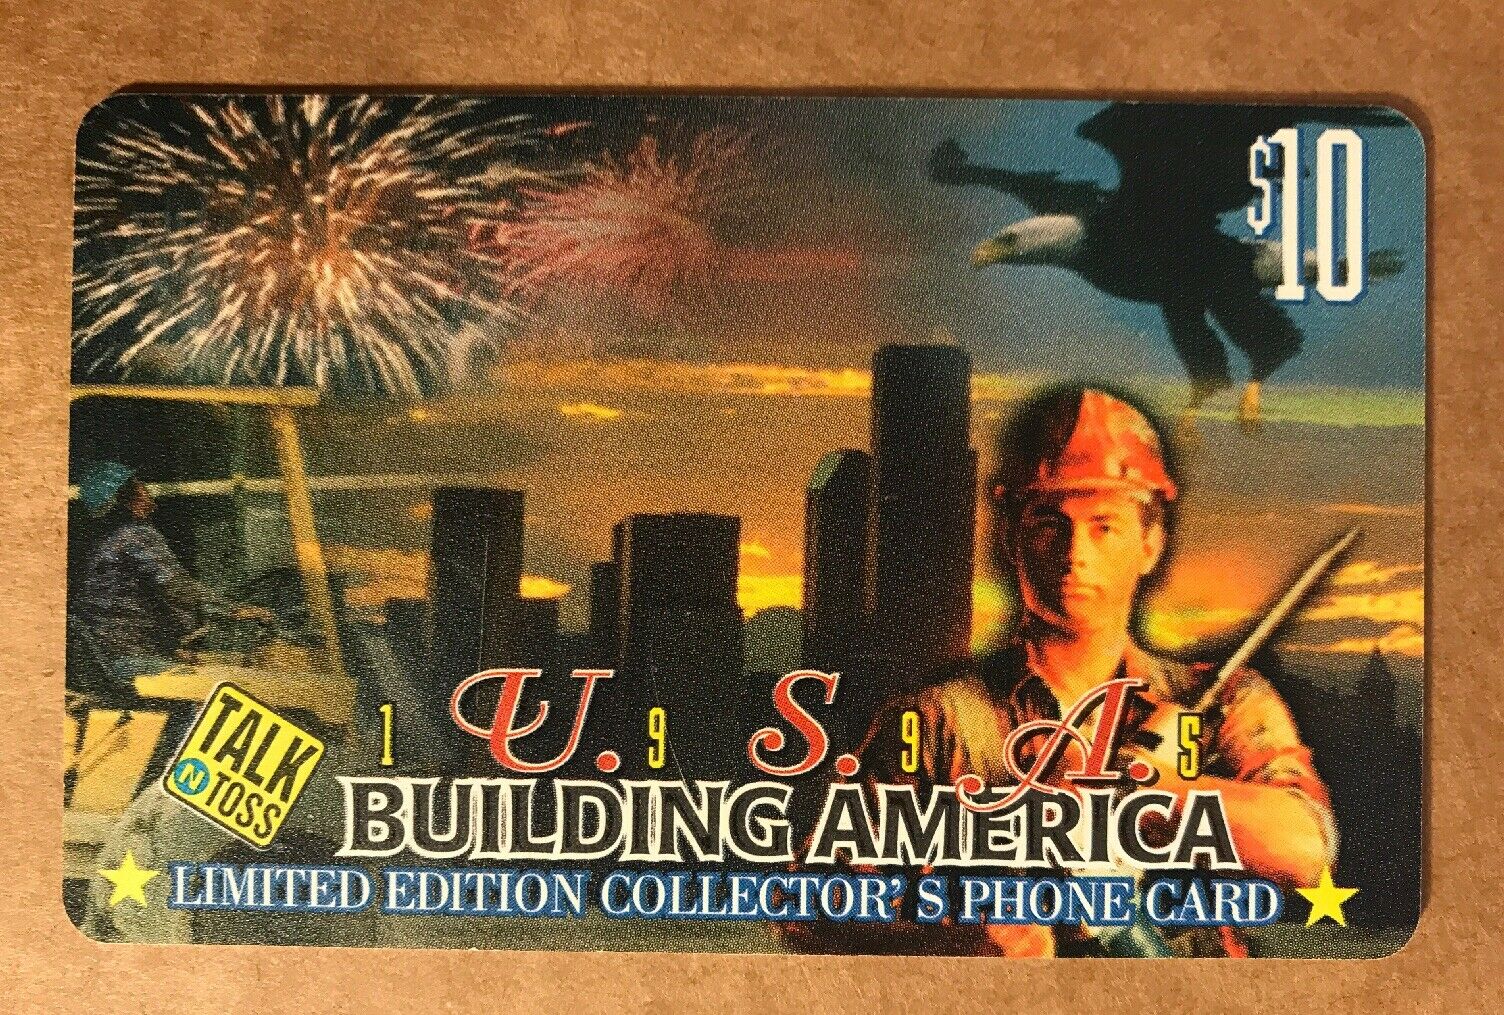 1995 Usa, Building America, Limited Edition Collector’s $10 Phone Card, Used